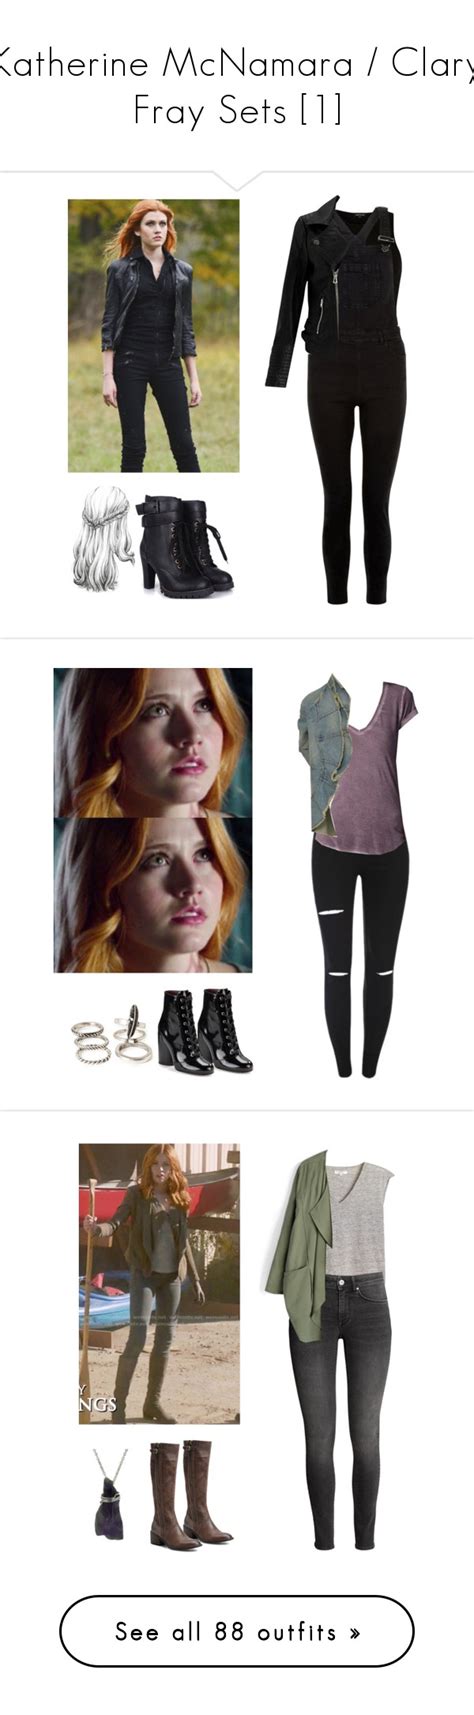 Katherine McNamara Clary Fray Sets 1 By Demiwitch Of Mischief